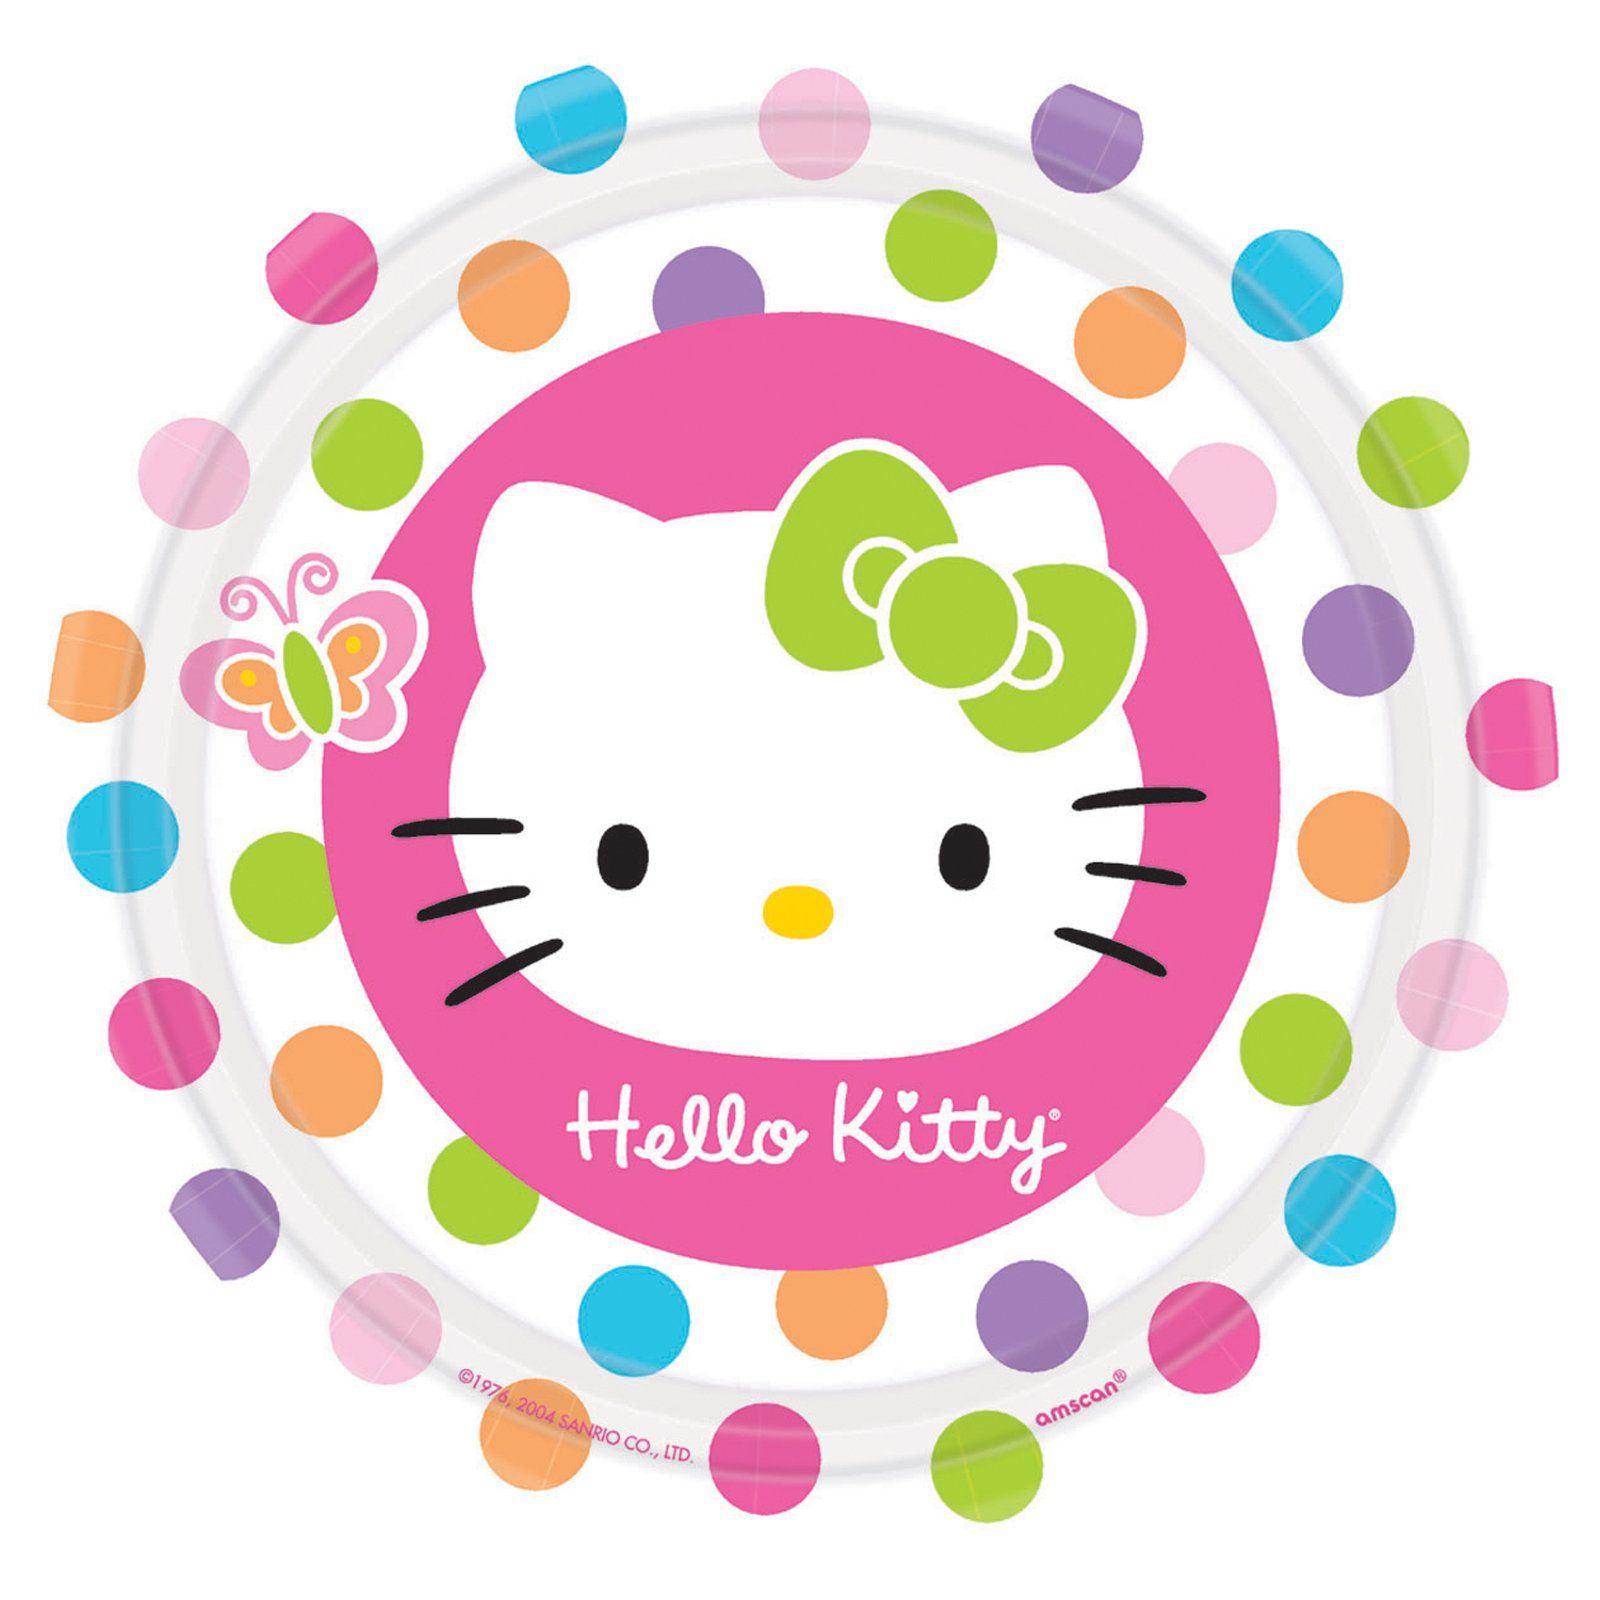 Hello Kitty Live Wallpaper For Android Free Mobile - Character Balloon Hello Kitty , HD Wallpaper & Backgrounds